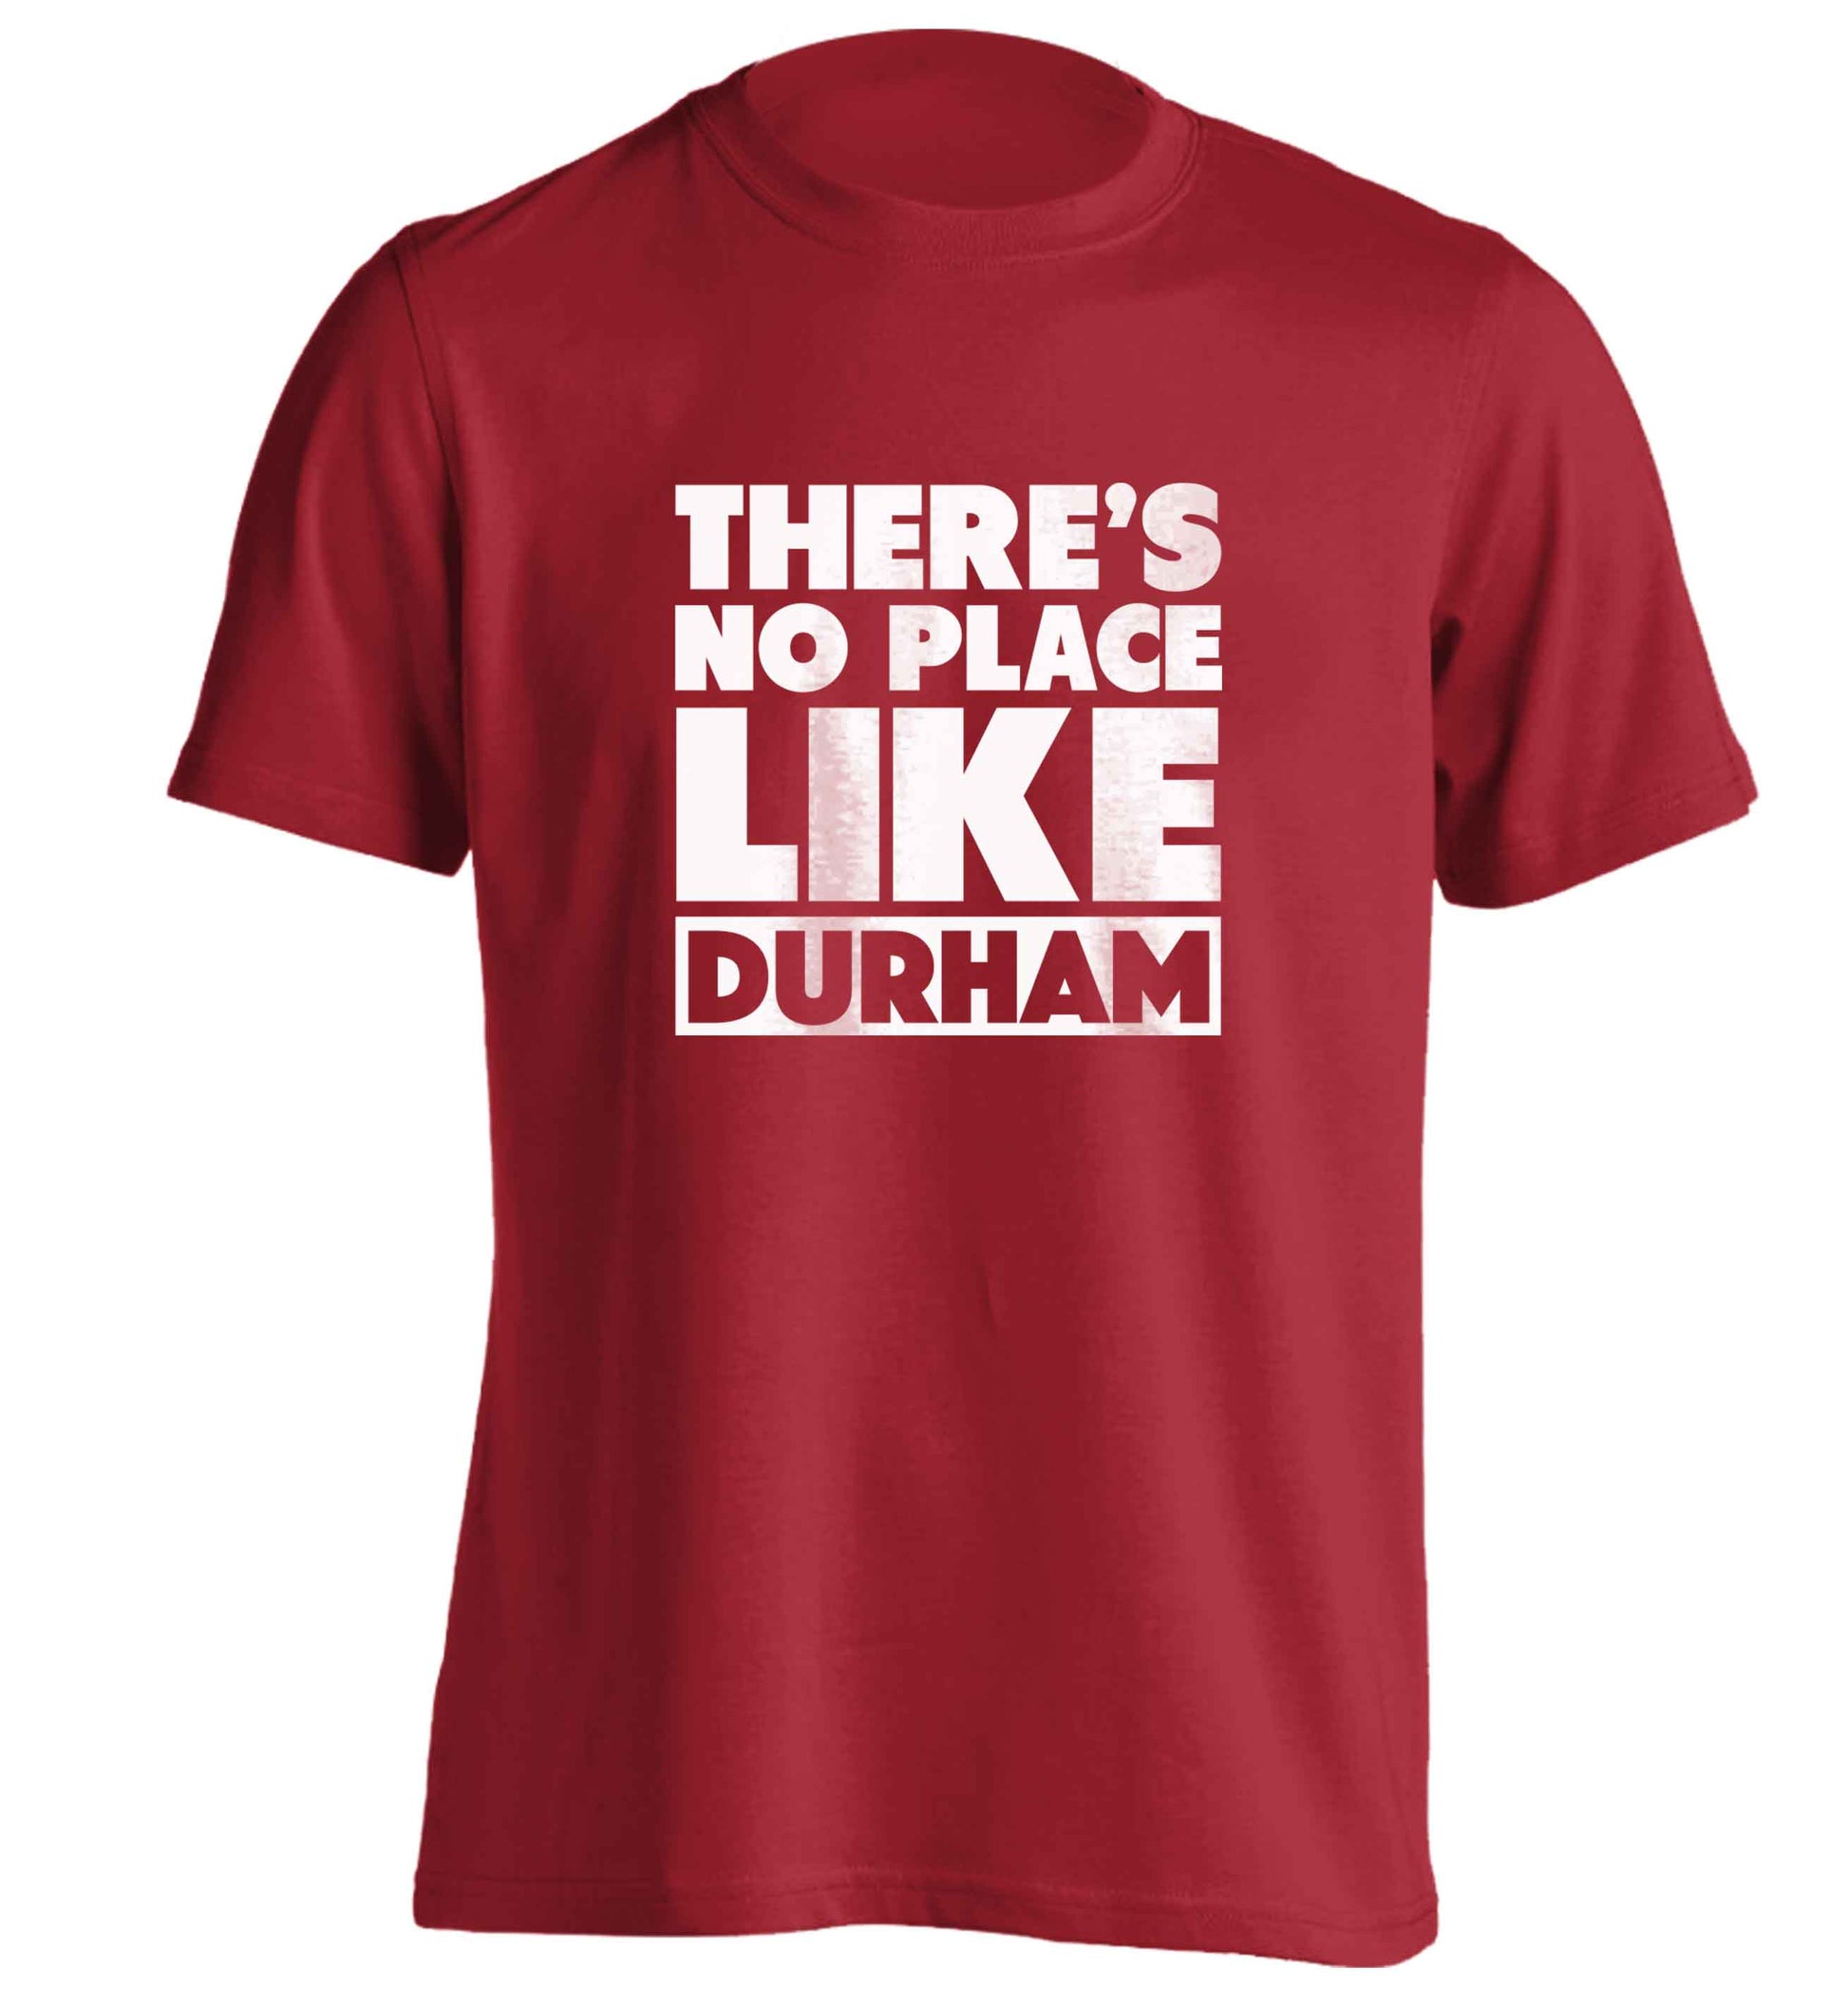 There's no place like Durham adults unisex red Tshirt 2XL